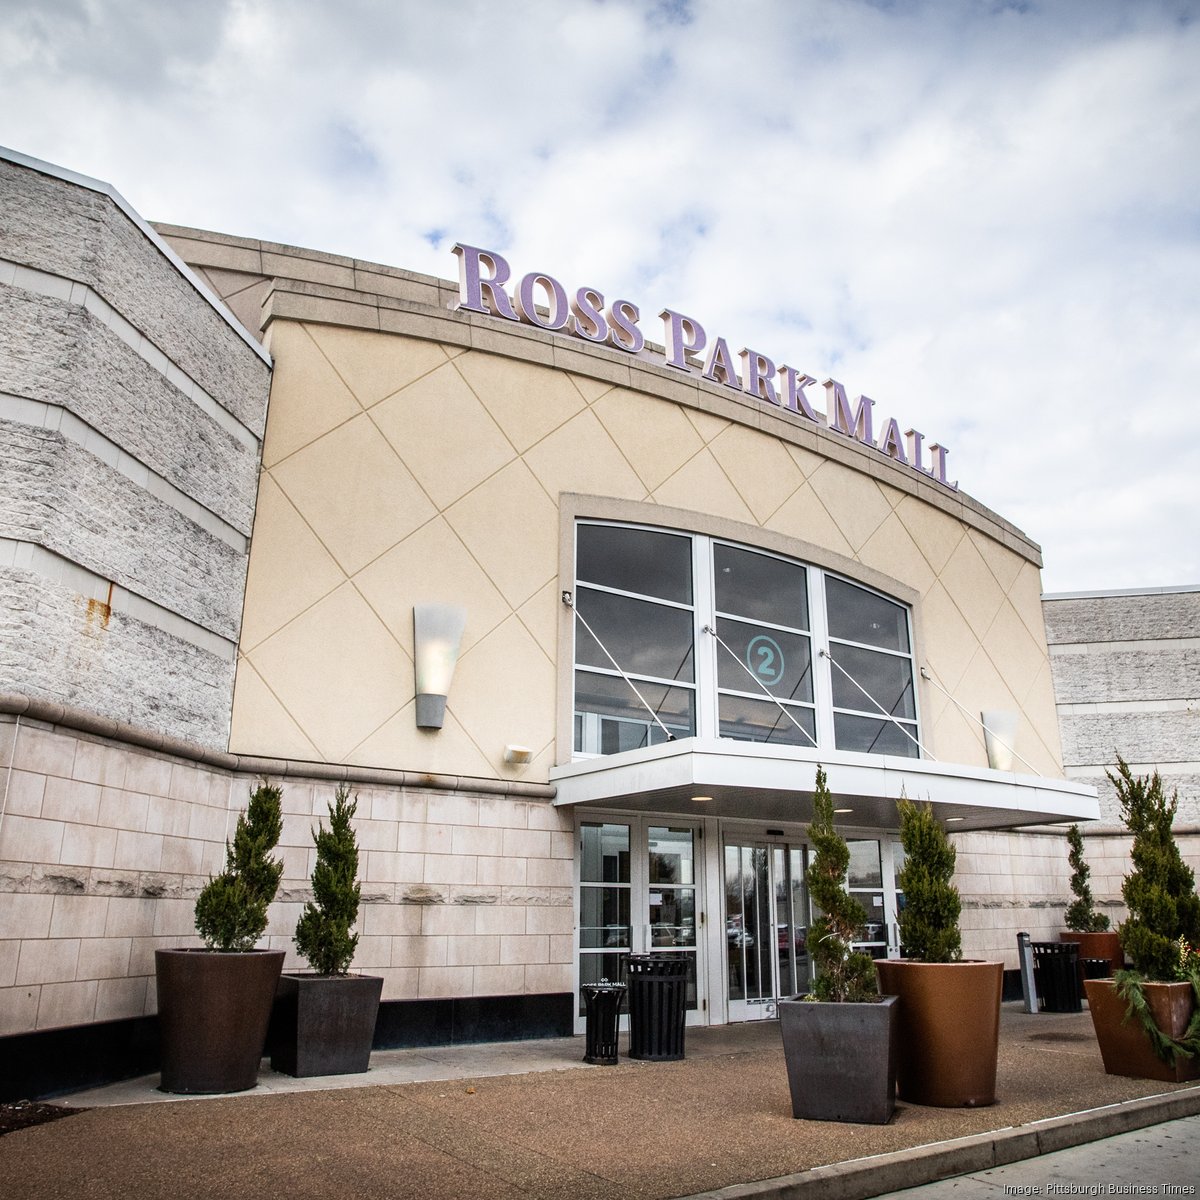 Ross Park Mall names new restaurant, new retail locations